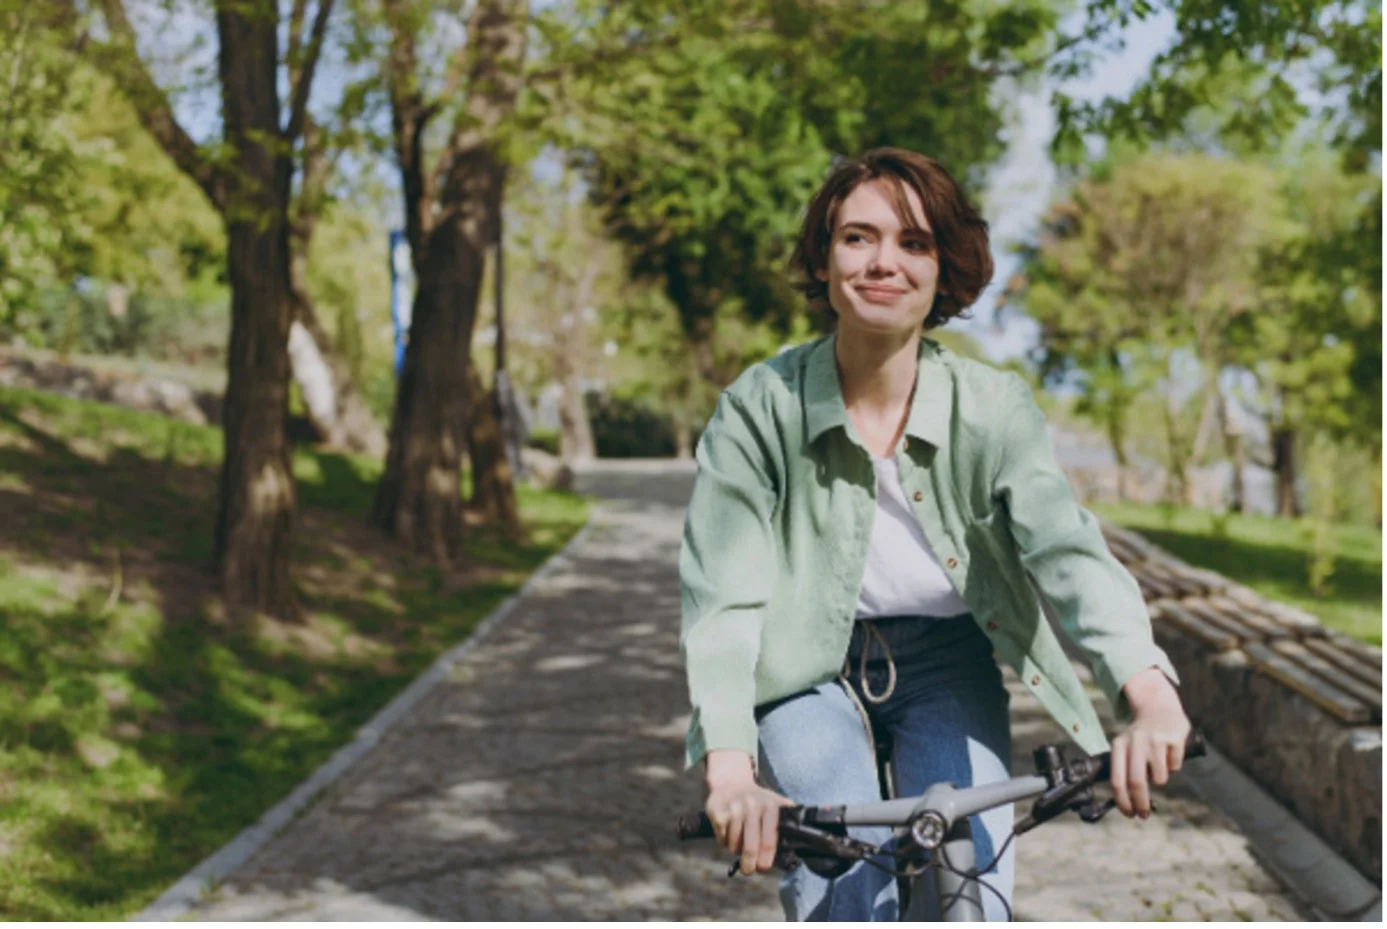 Woman smiles while riding a bike along a tree-lined path